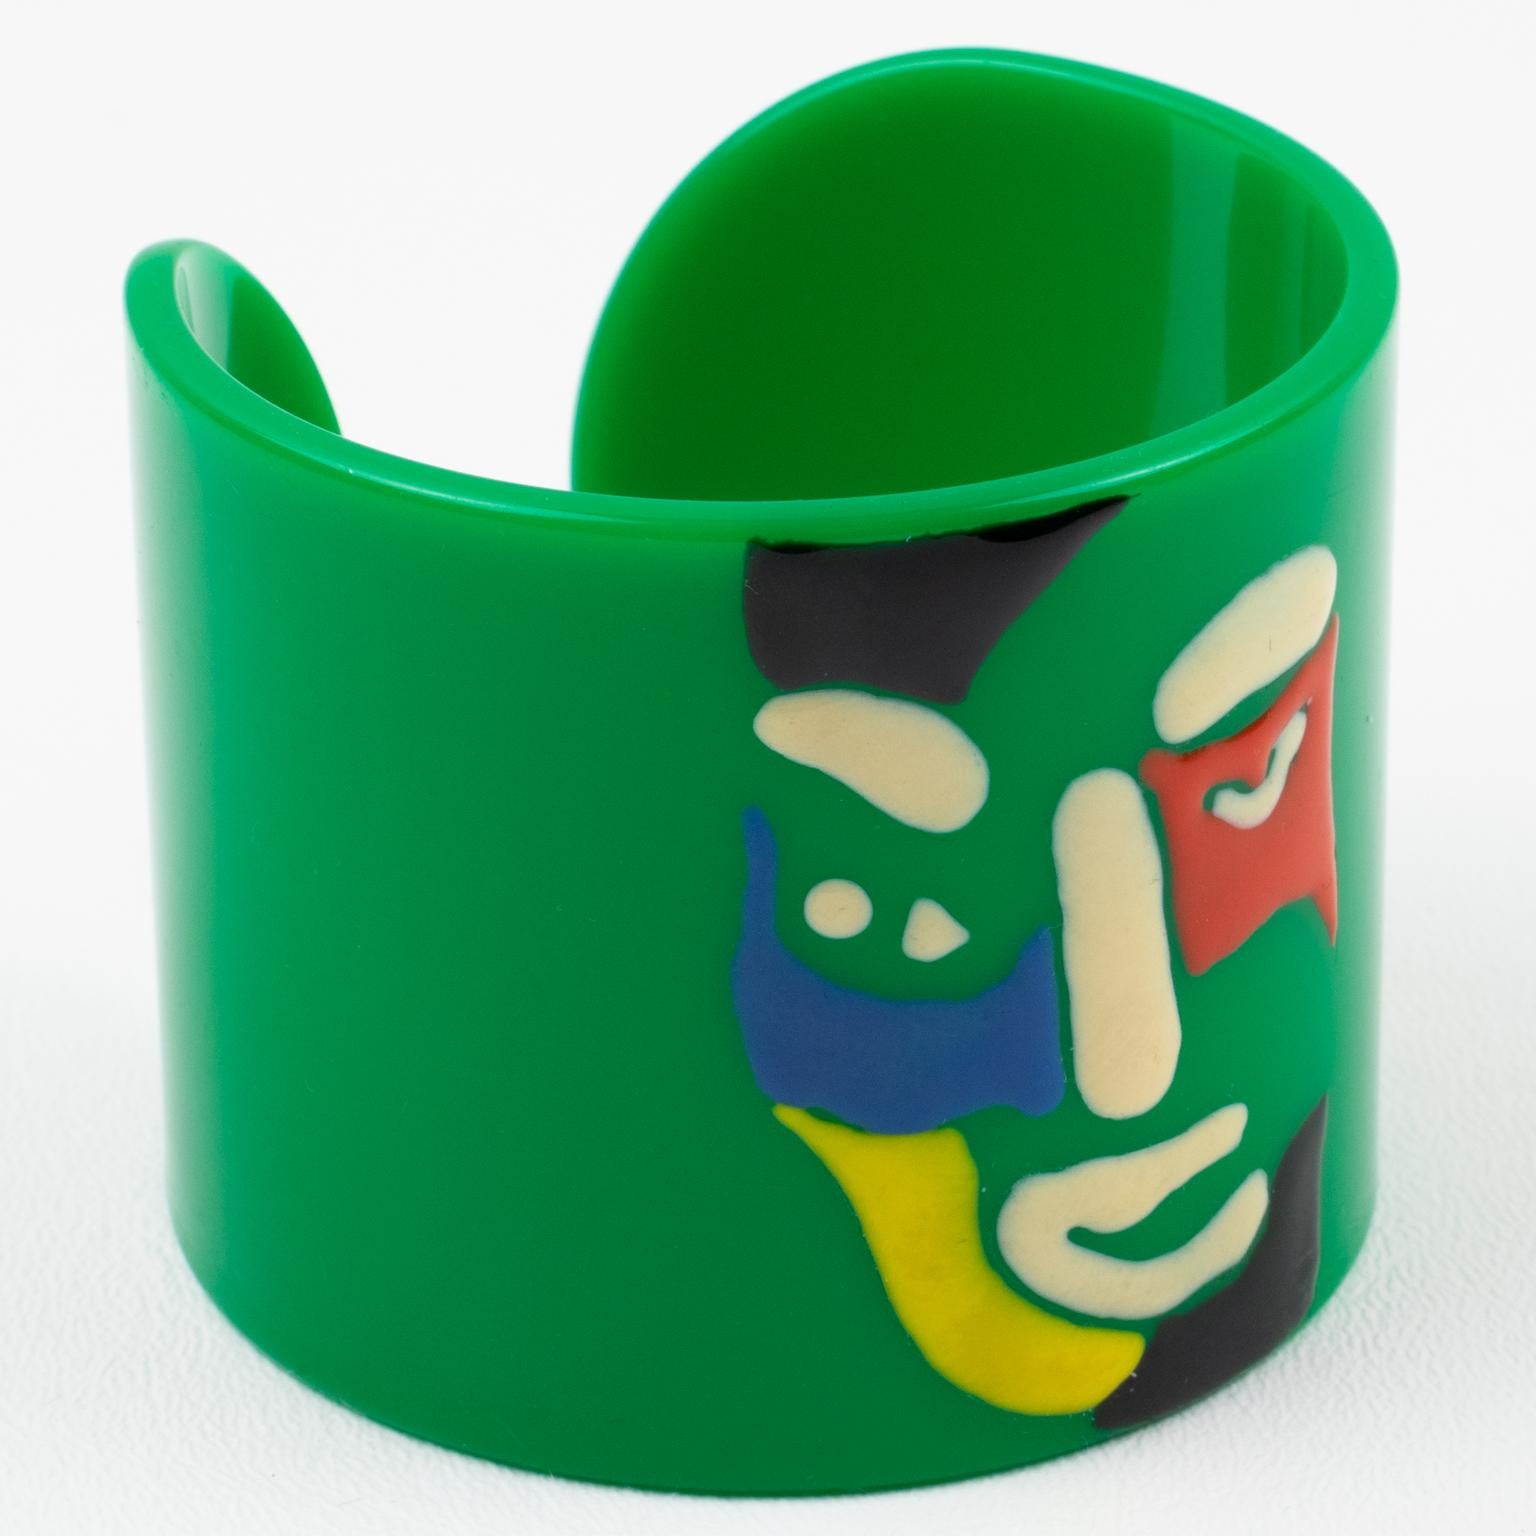 A rare iconic Missoni, Italy cuff bracelet. This 1980s couture Italian designer, Rosita Missoni bracelet is adorned with a multi-color iconic smiling face. Emerald green resin background with the hand-enameled multicolor smiling face. No visible